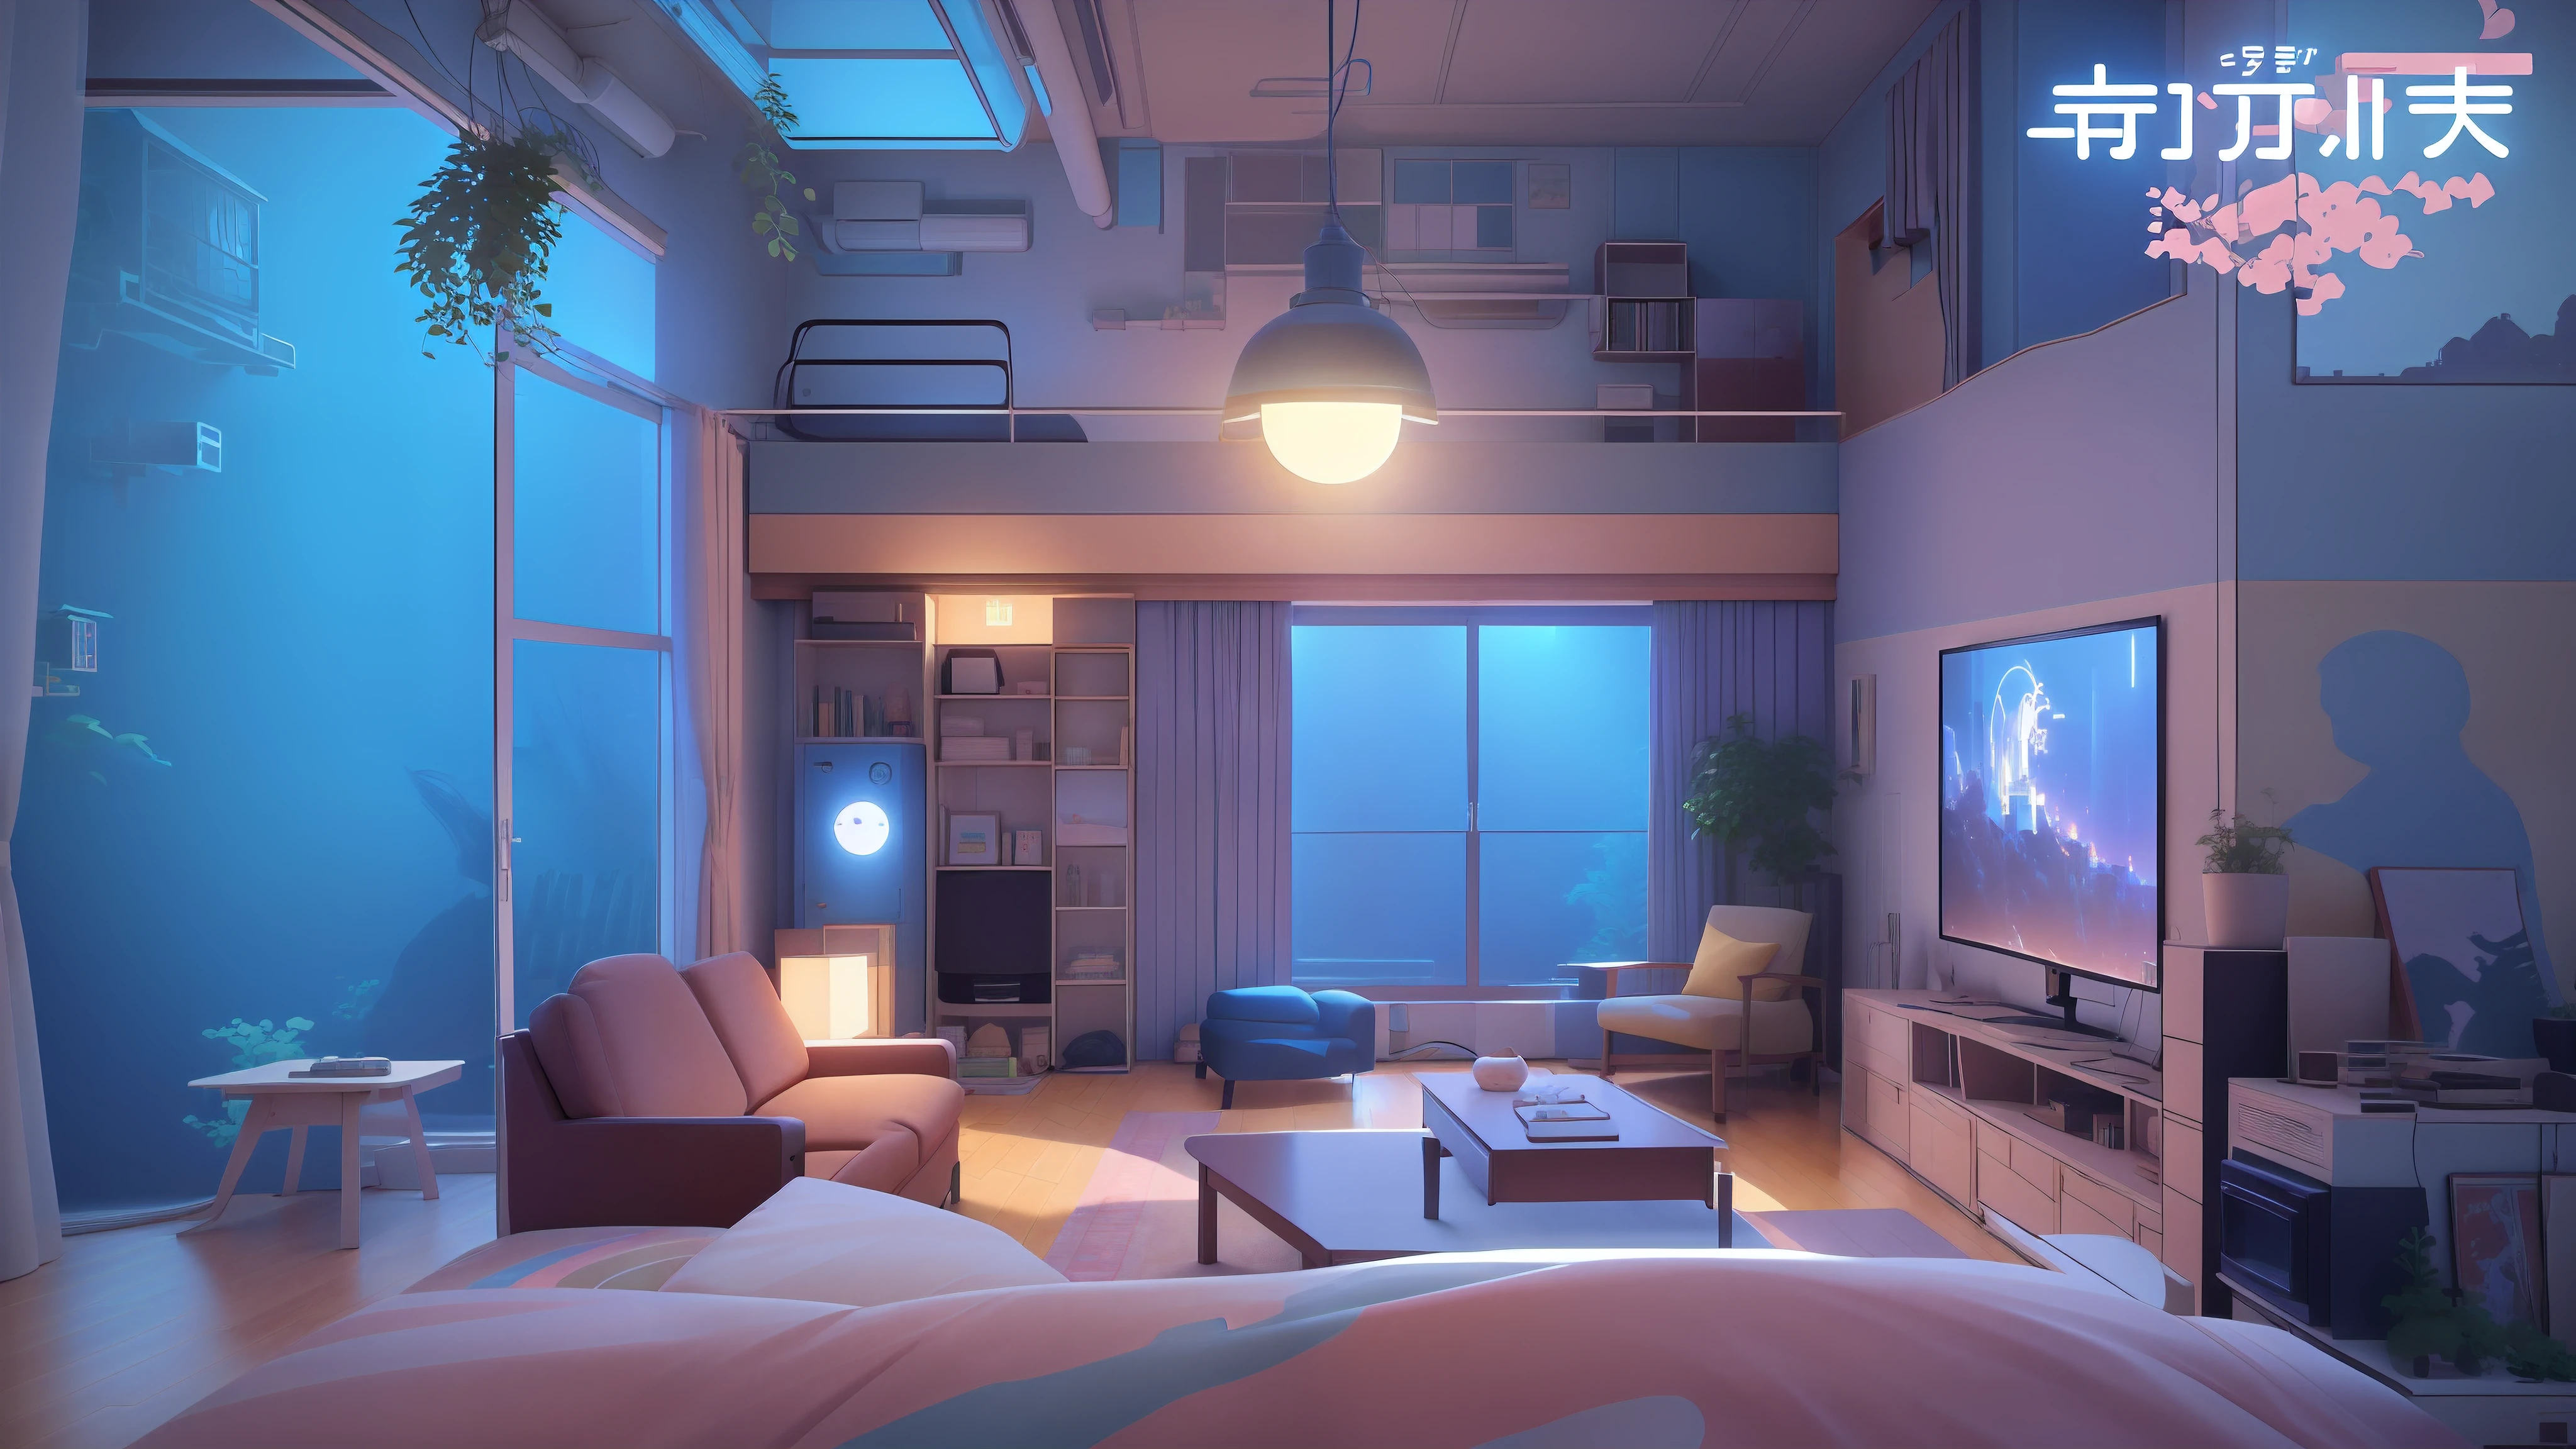 anime scene of a living room with a big fish tank, bedroom in